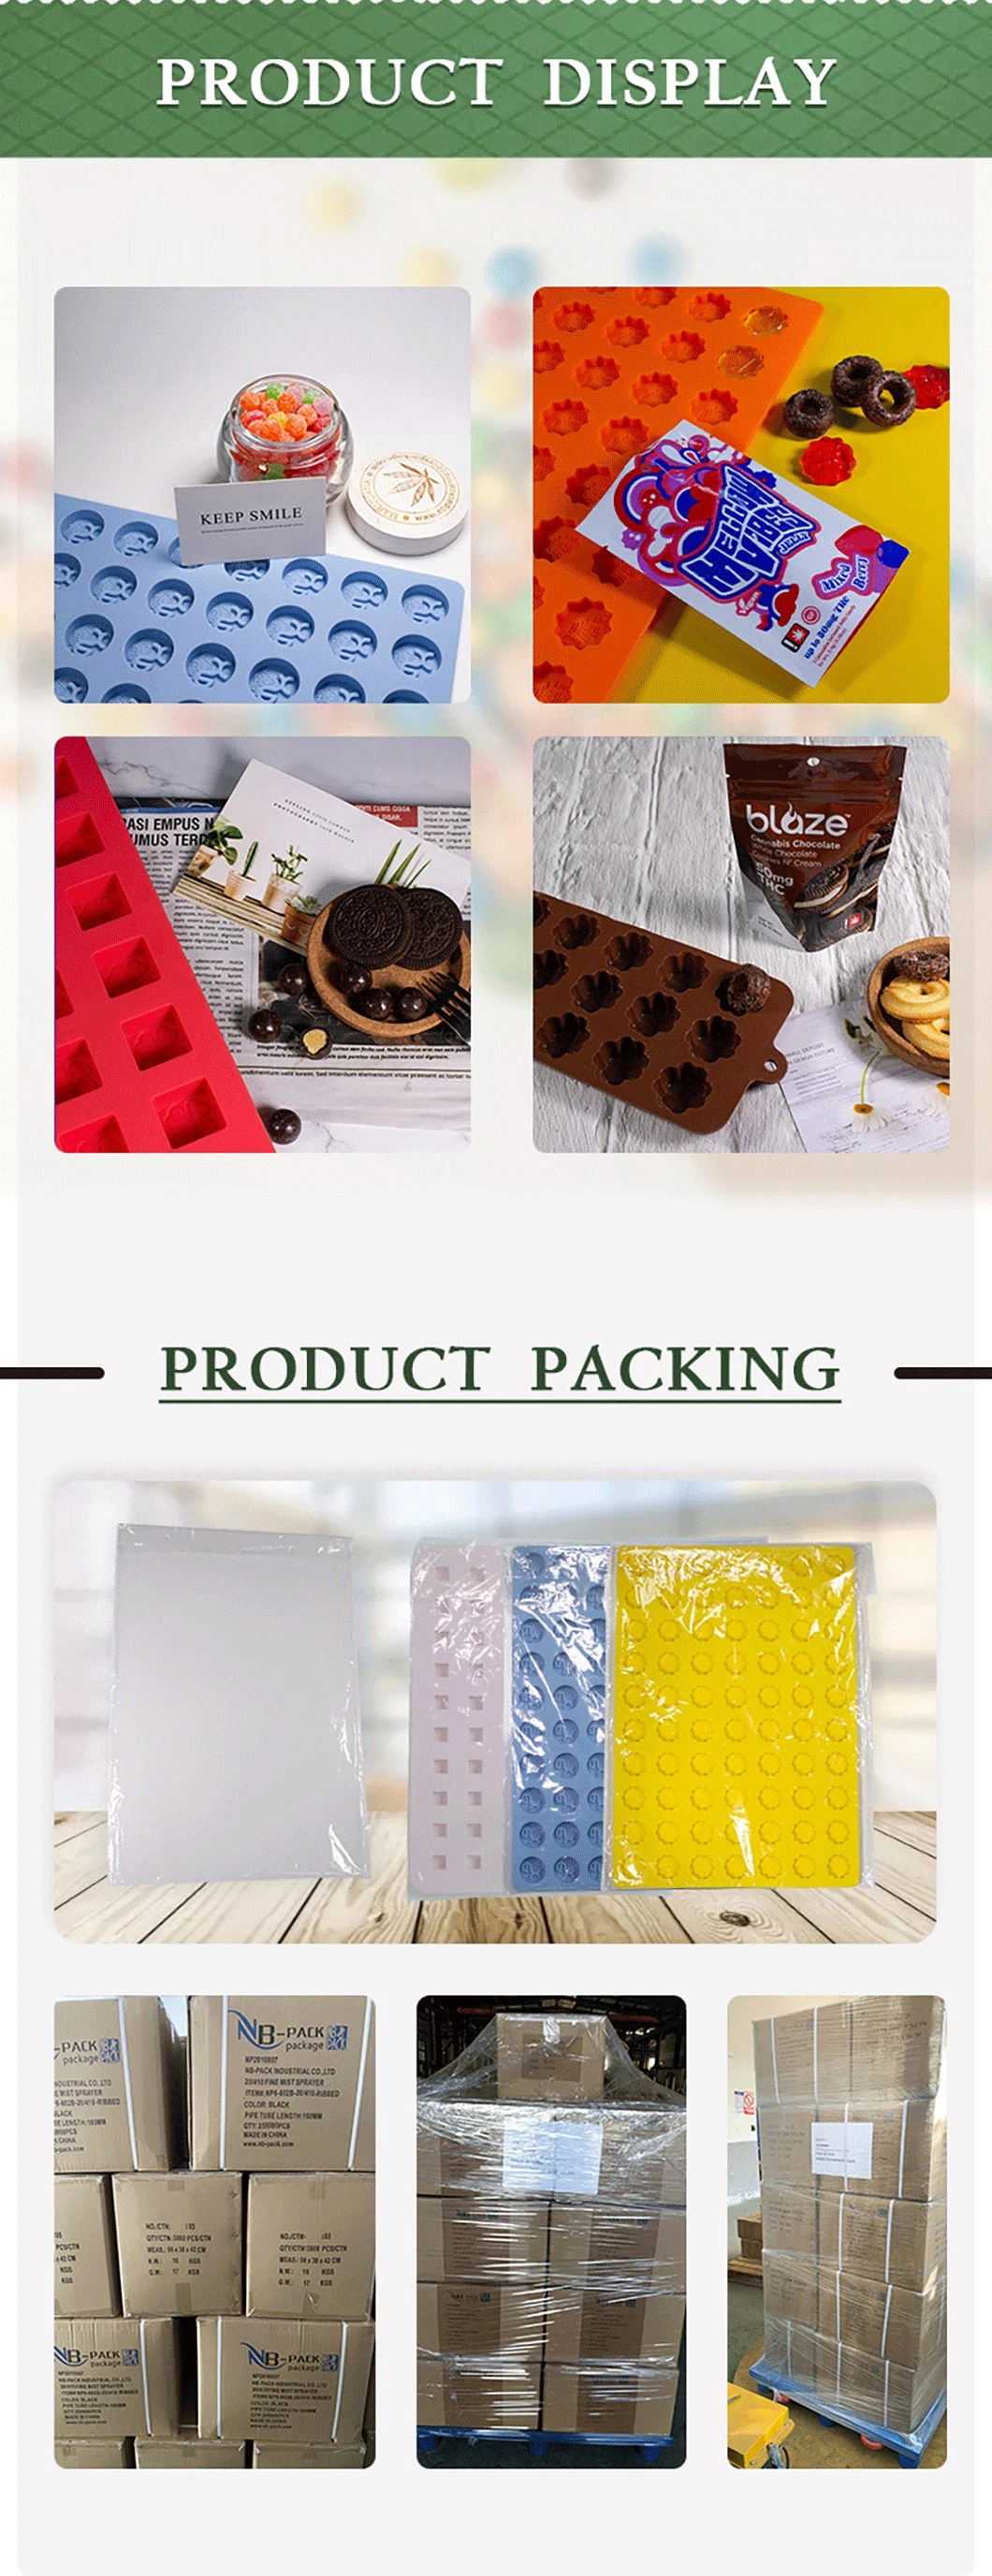 DIY Crystal Epoxy Gummy Customized Soft Candy Silicone Mould Baking Jelly Fondant Cake Chocolate Candy Pastry Ice Cube